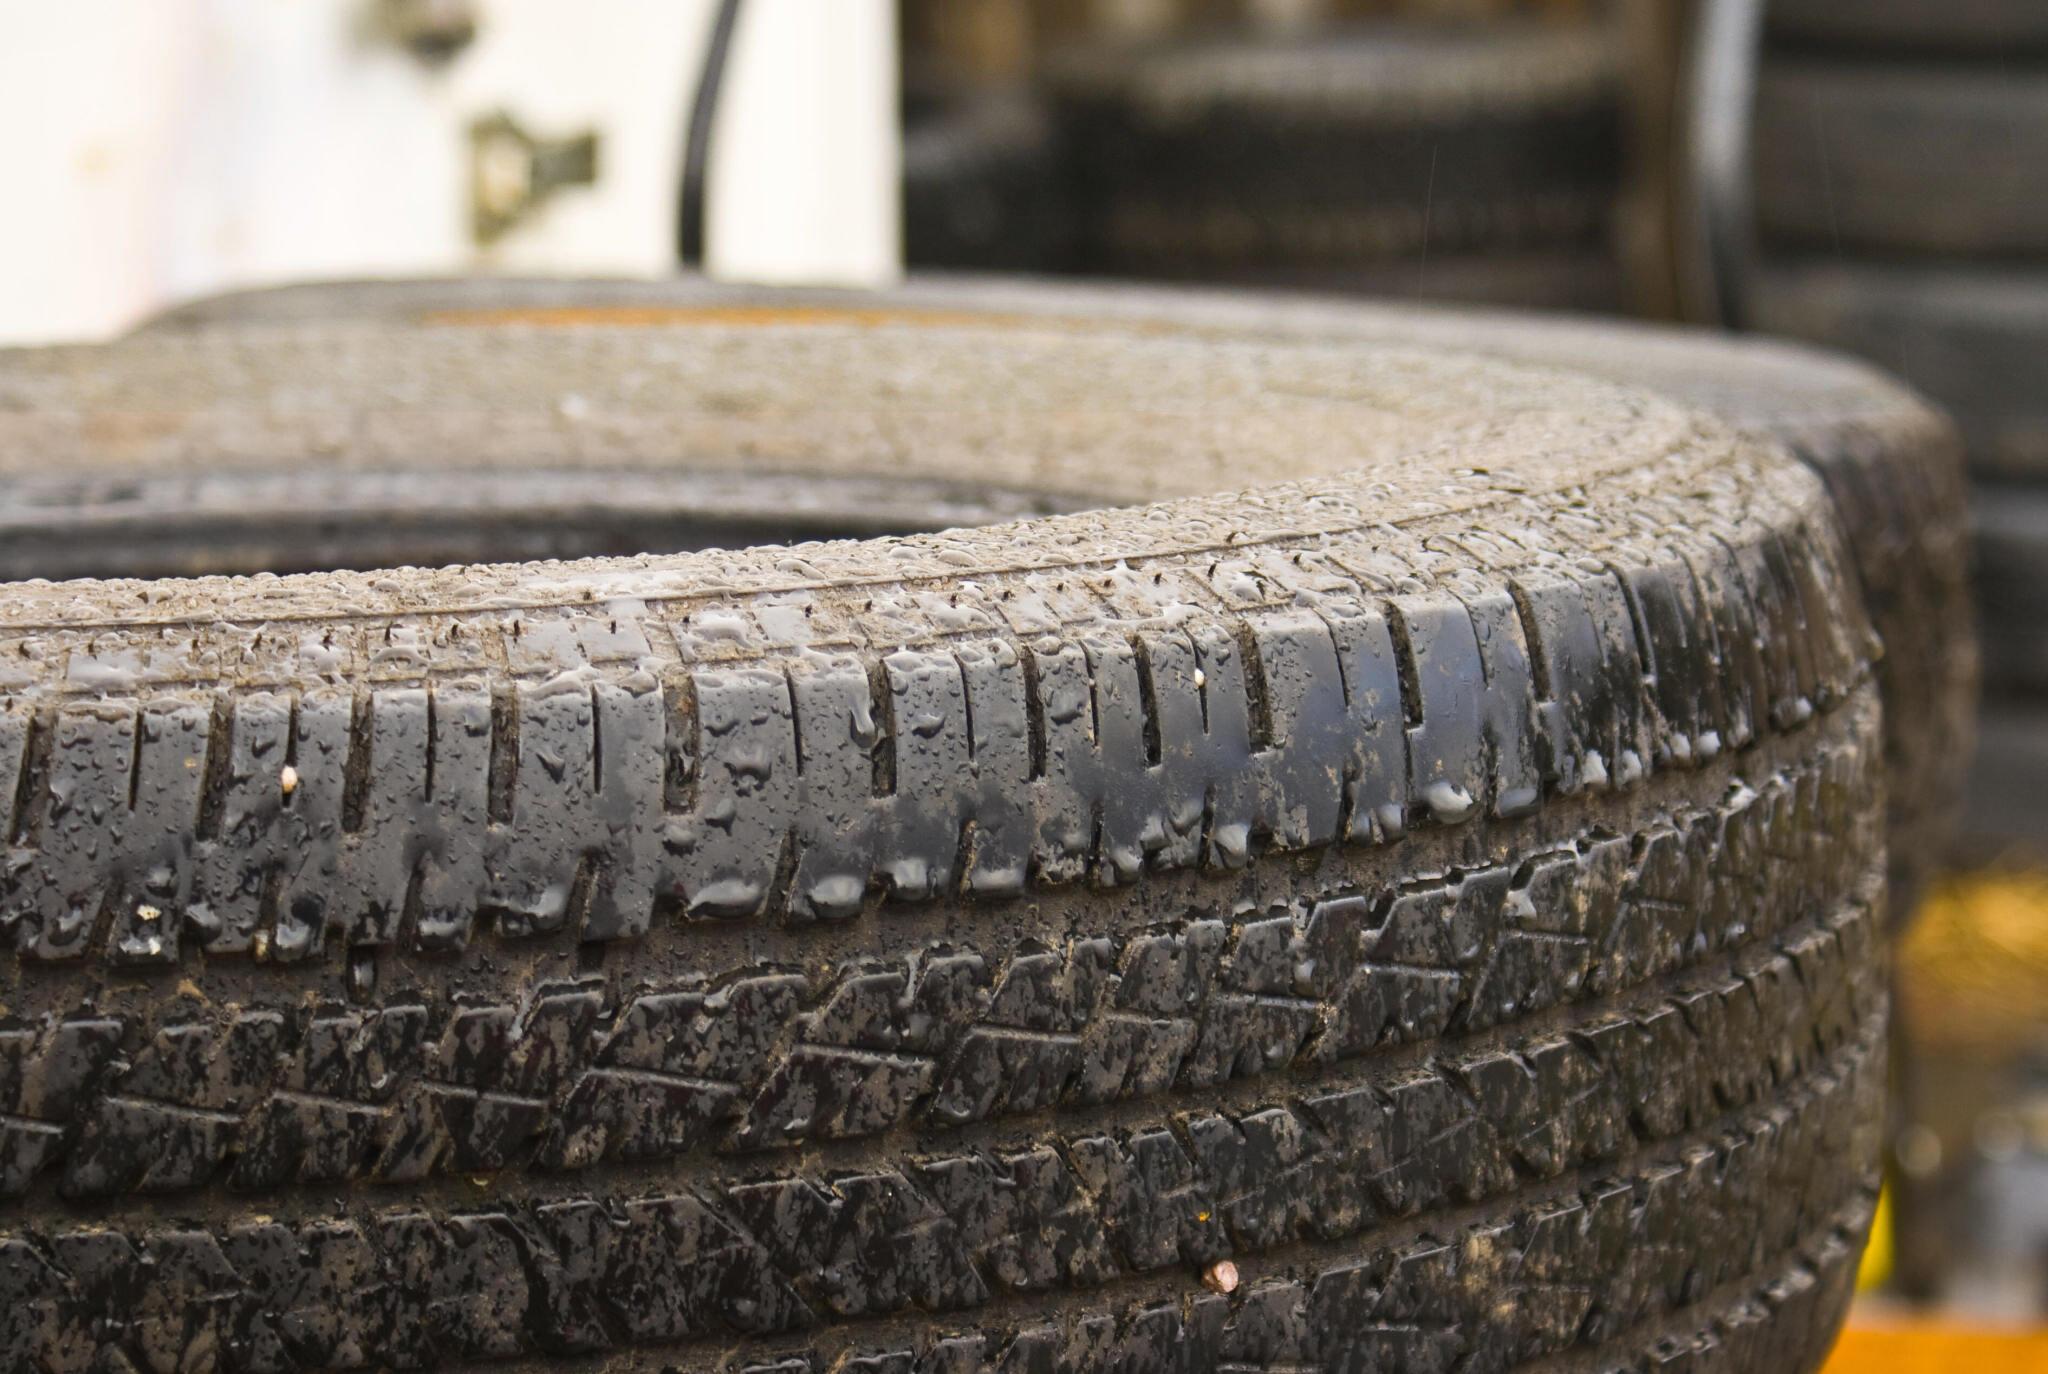 Used Tires: Maximize Value with Quality Used Tires